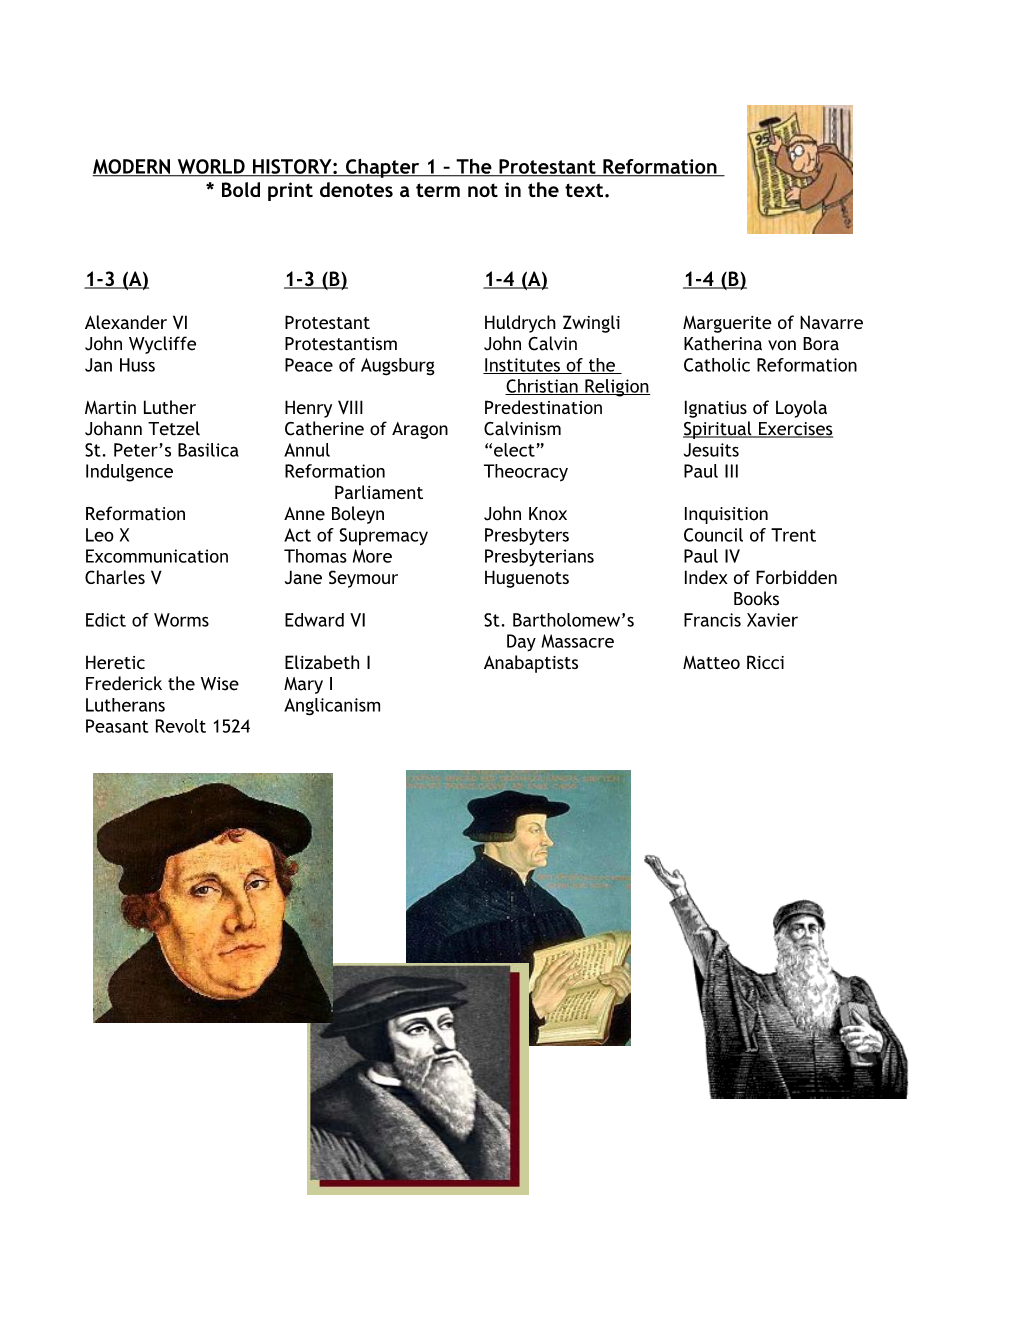 MODERN WORLD HISTORY: Chapter 1 the Protestant Reformation